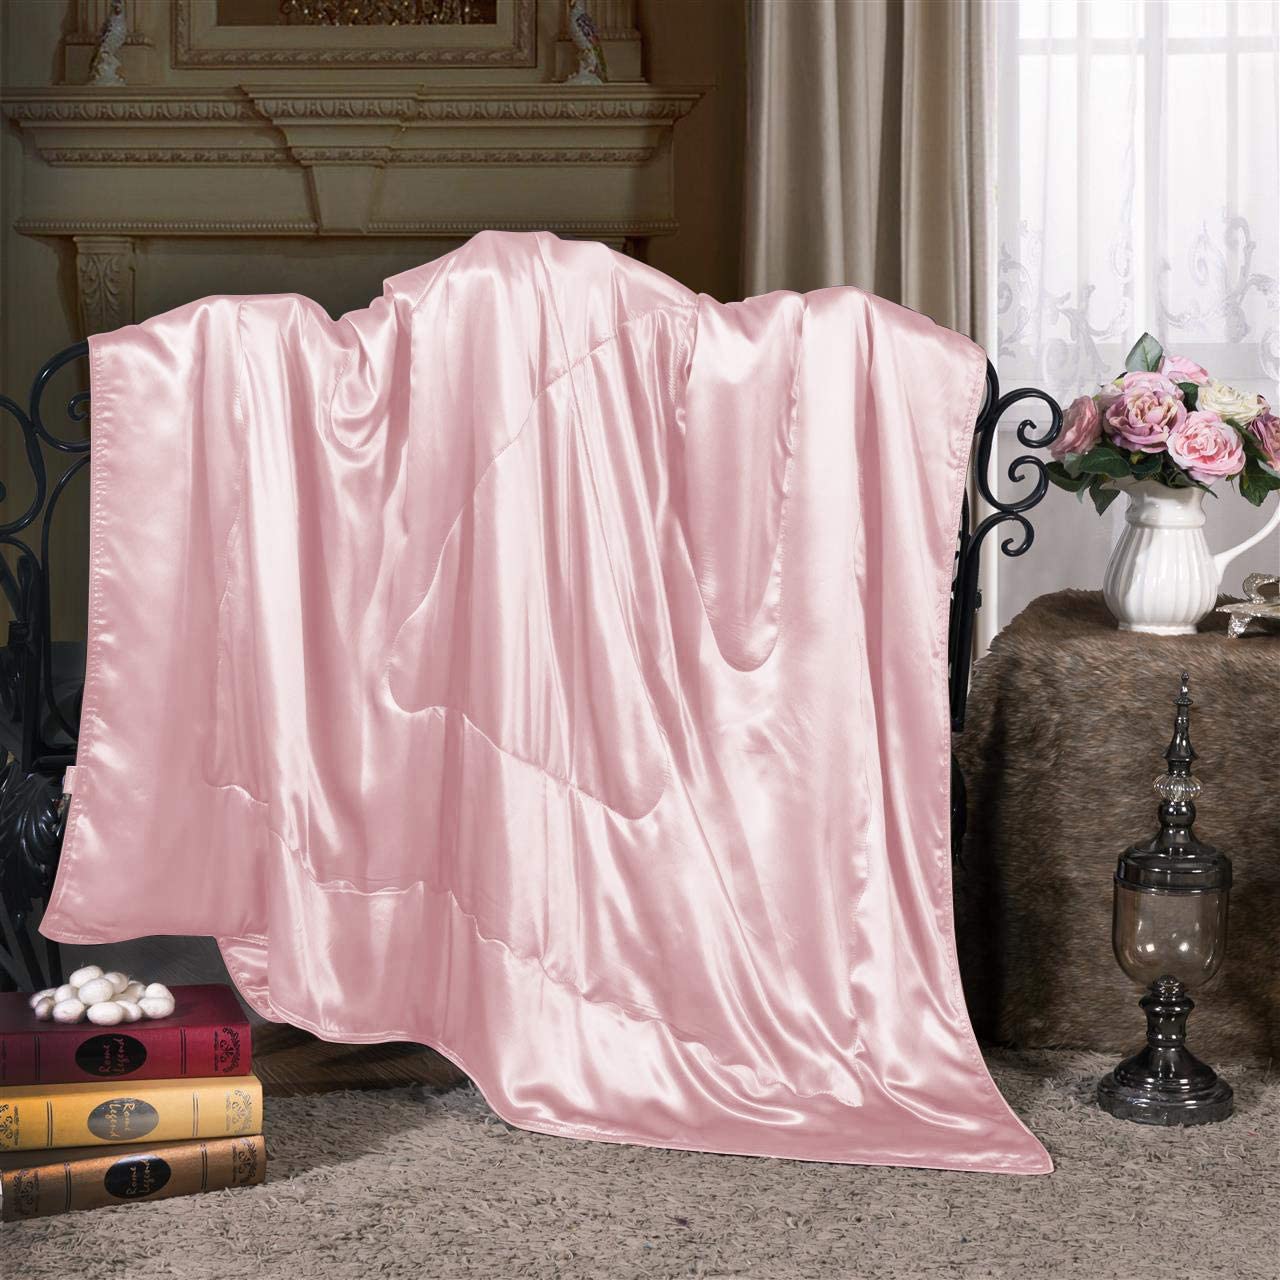 thumbnail 7 - Cozysilk Pure Silk Throw Blanket, 100% Mulberry Silk Inside and Outside, Pure Si